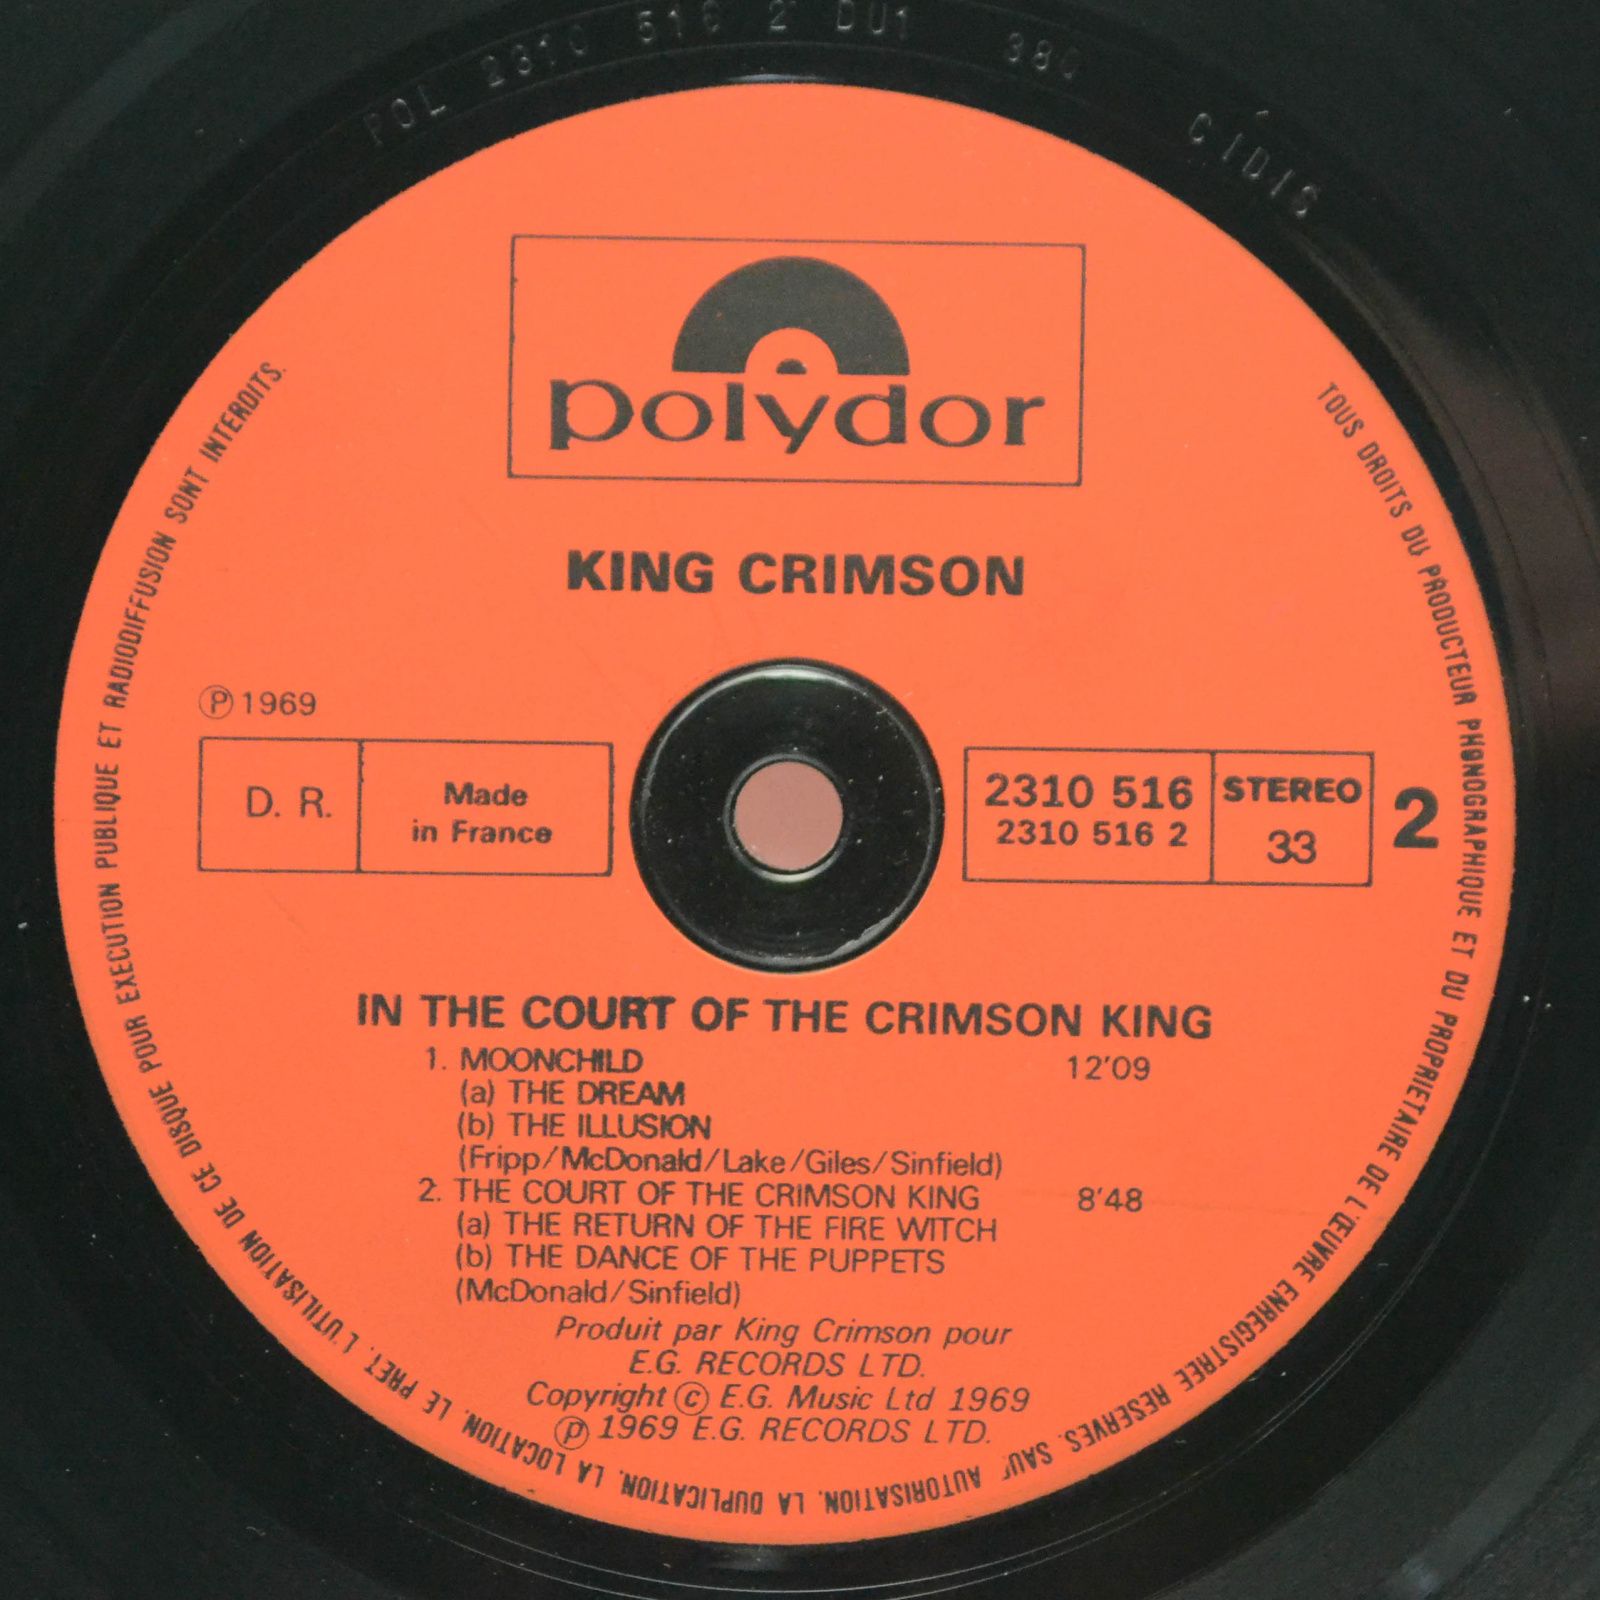 King Crimson — In The Court Of The Crimson King (An Observation By King Crimson), 1969